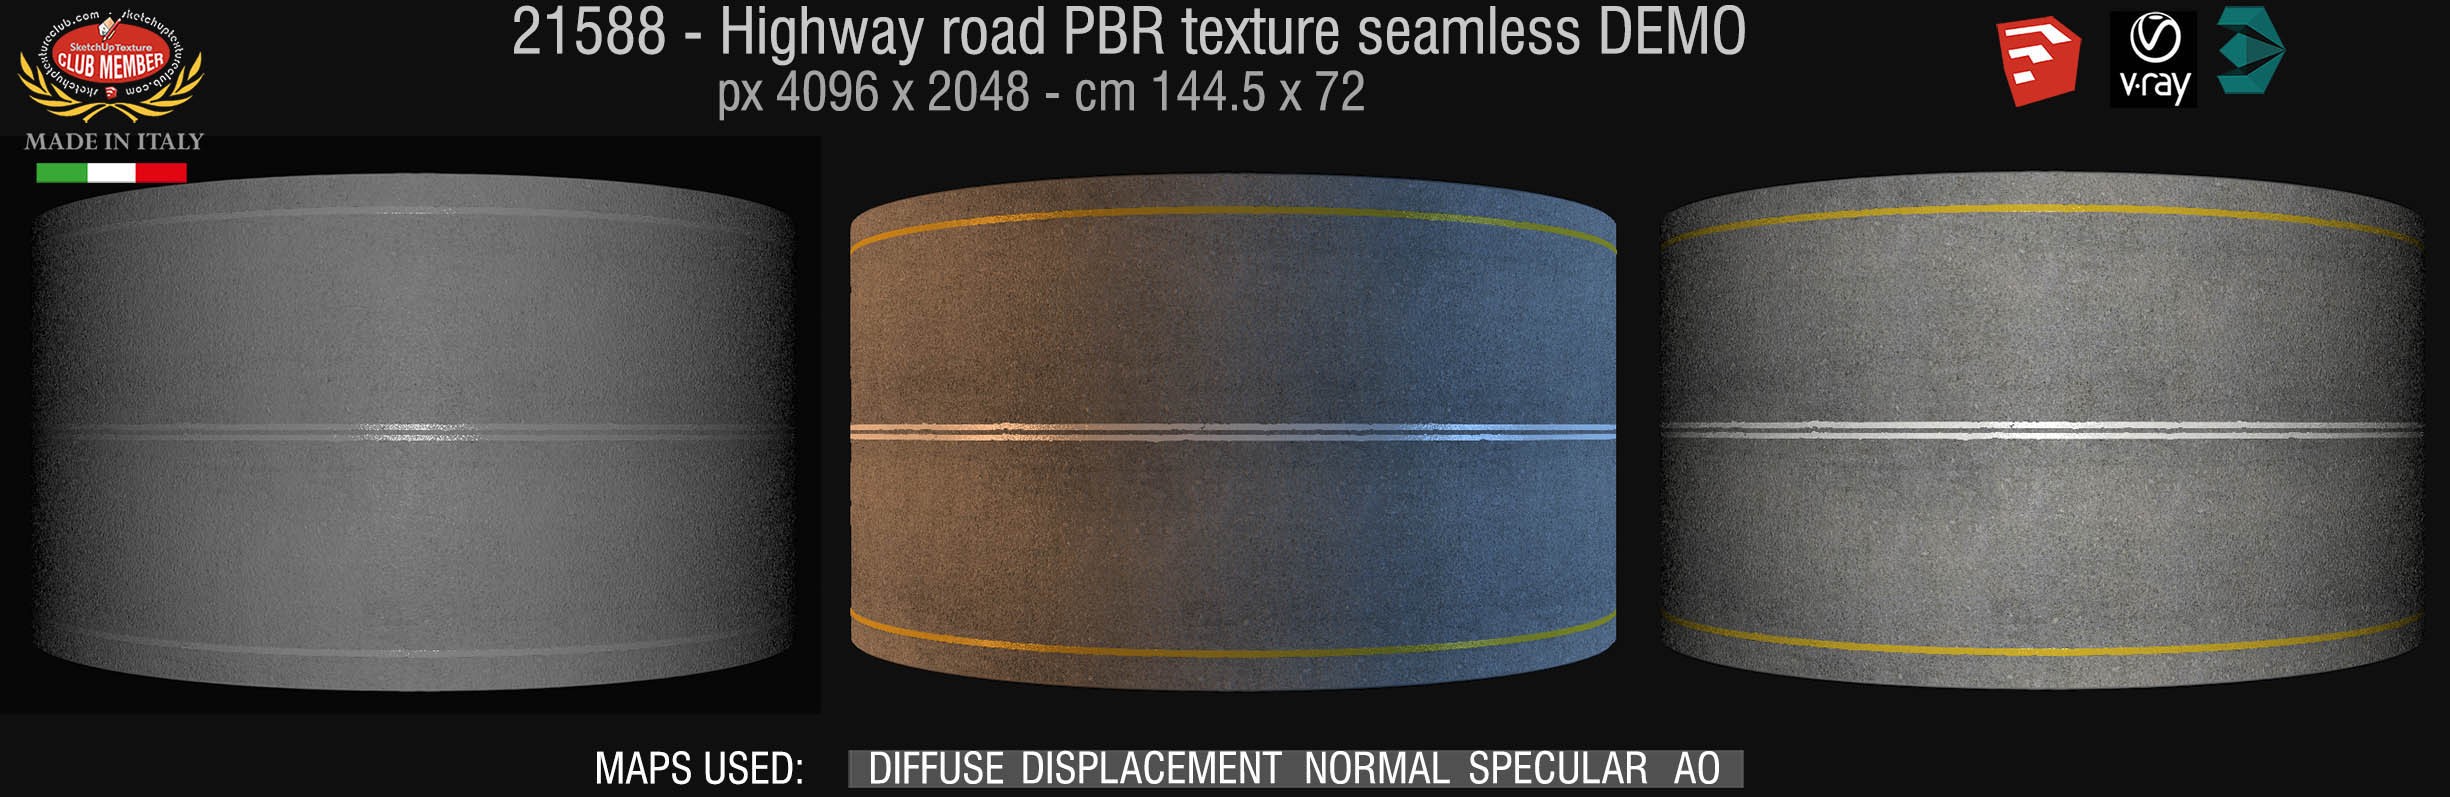 21588 Highway road PBR texture-seamless DEMO